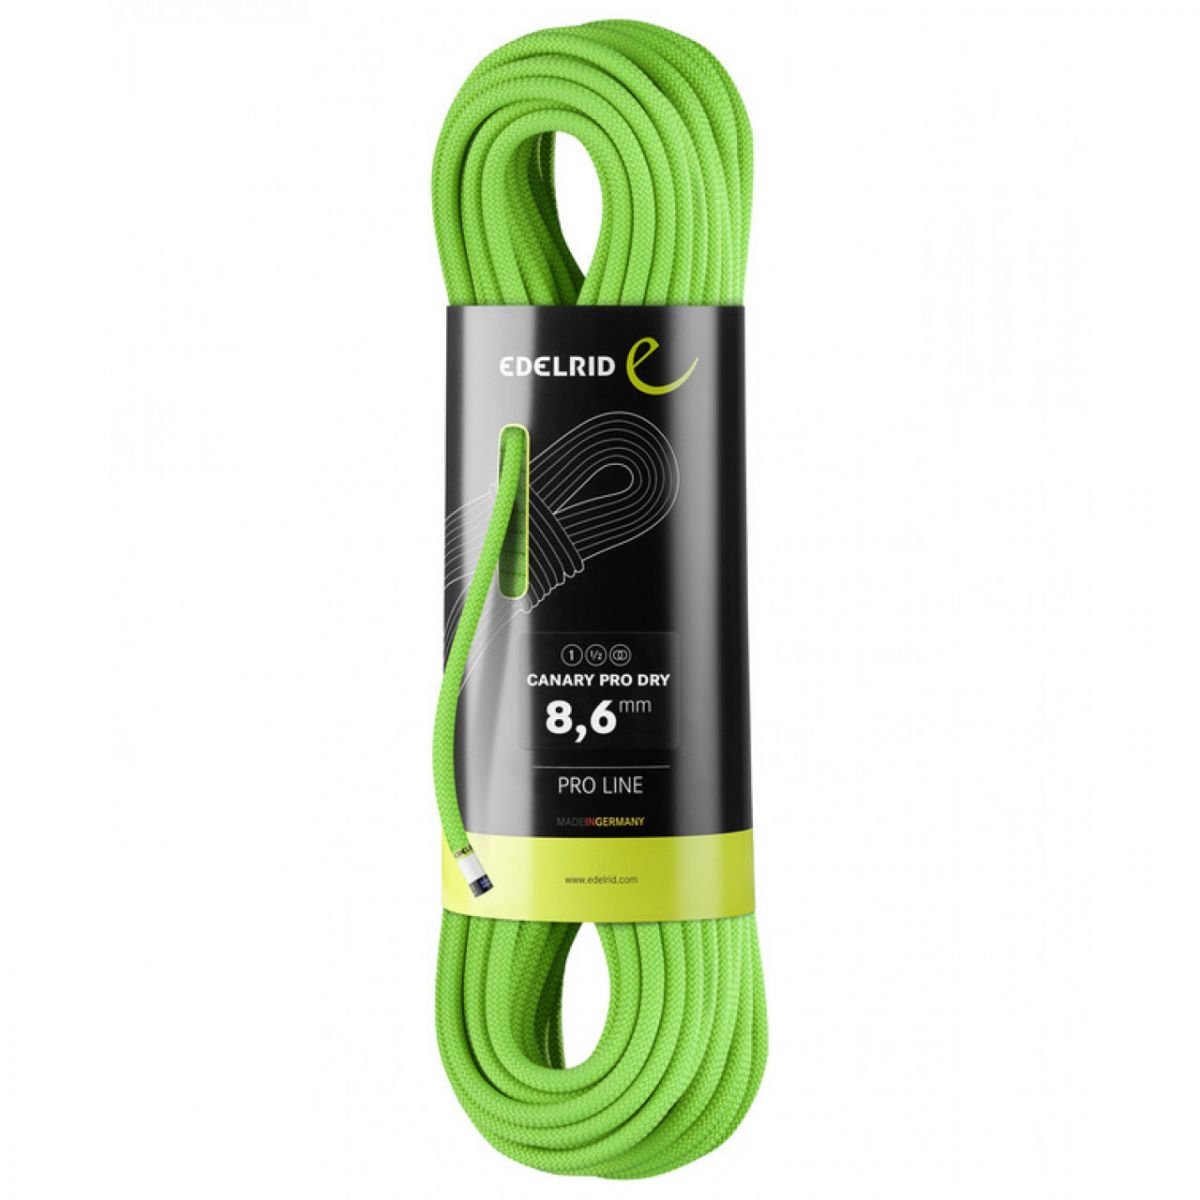 Edelrid Canary Pro Dry 8.6mm 60m